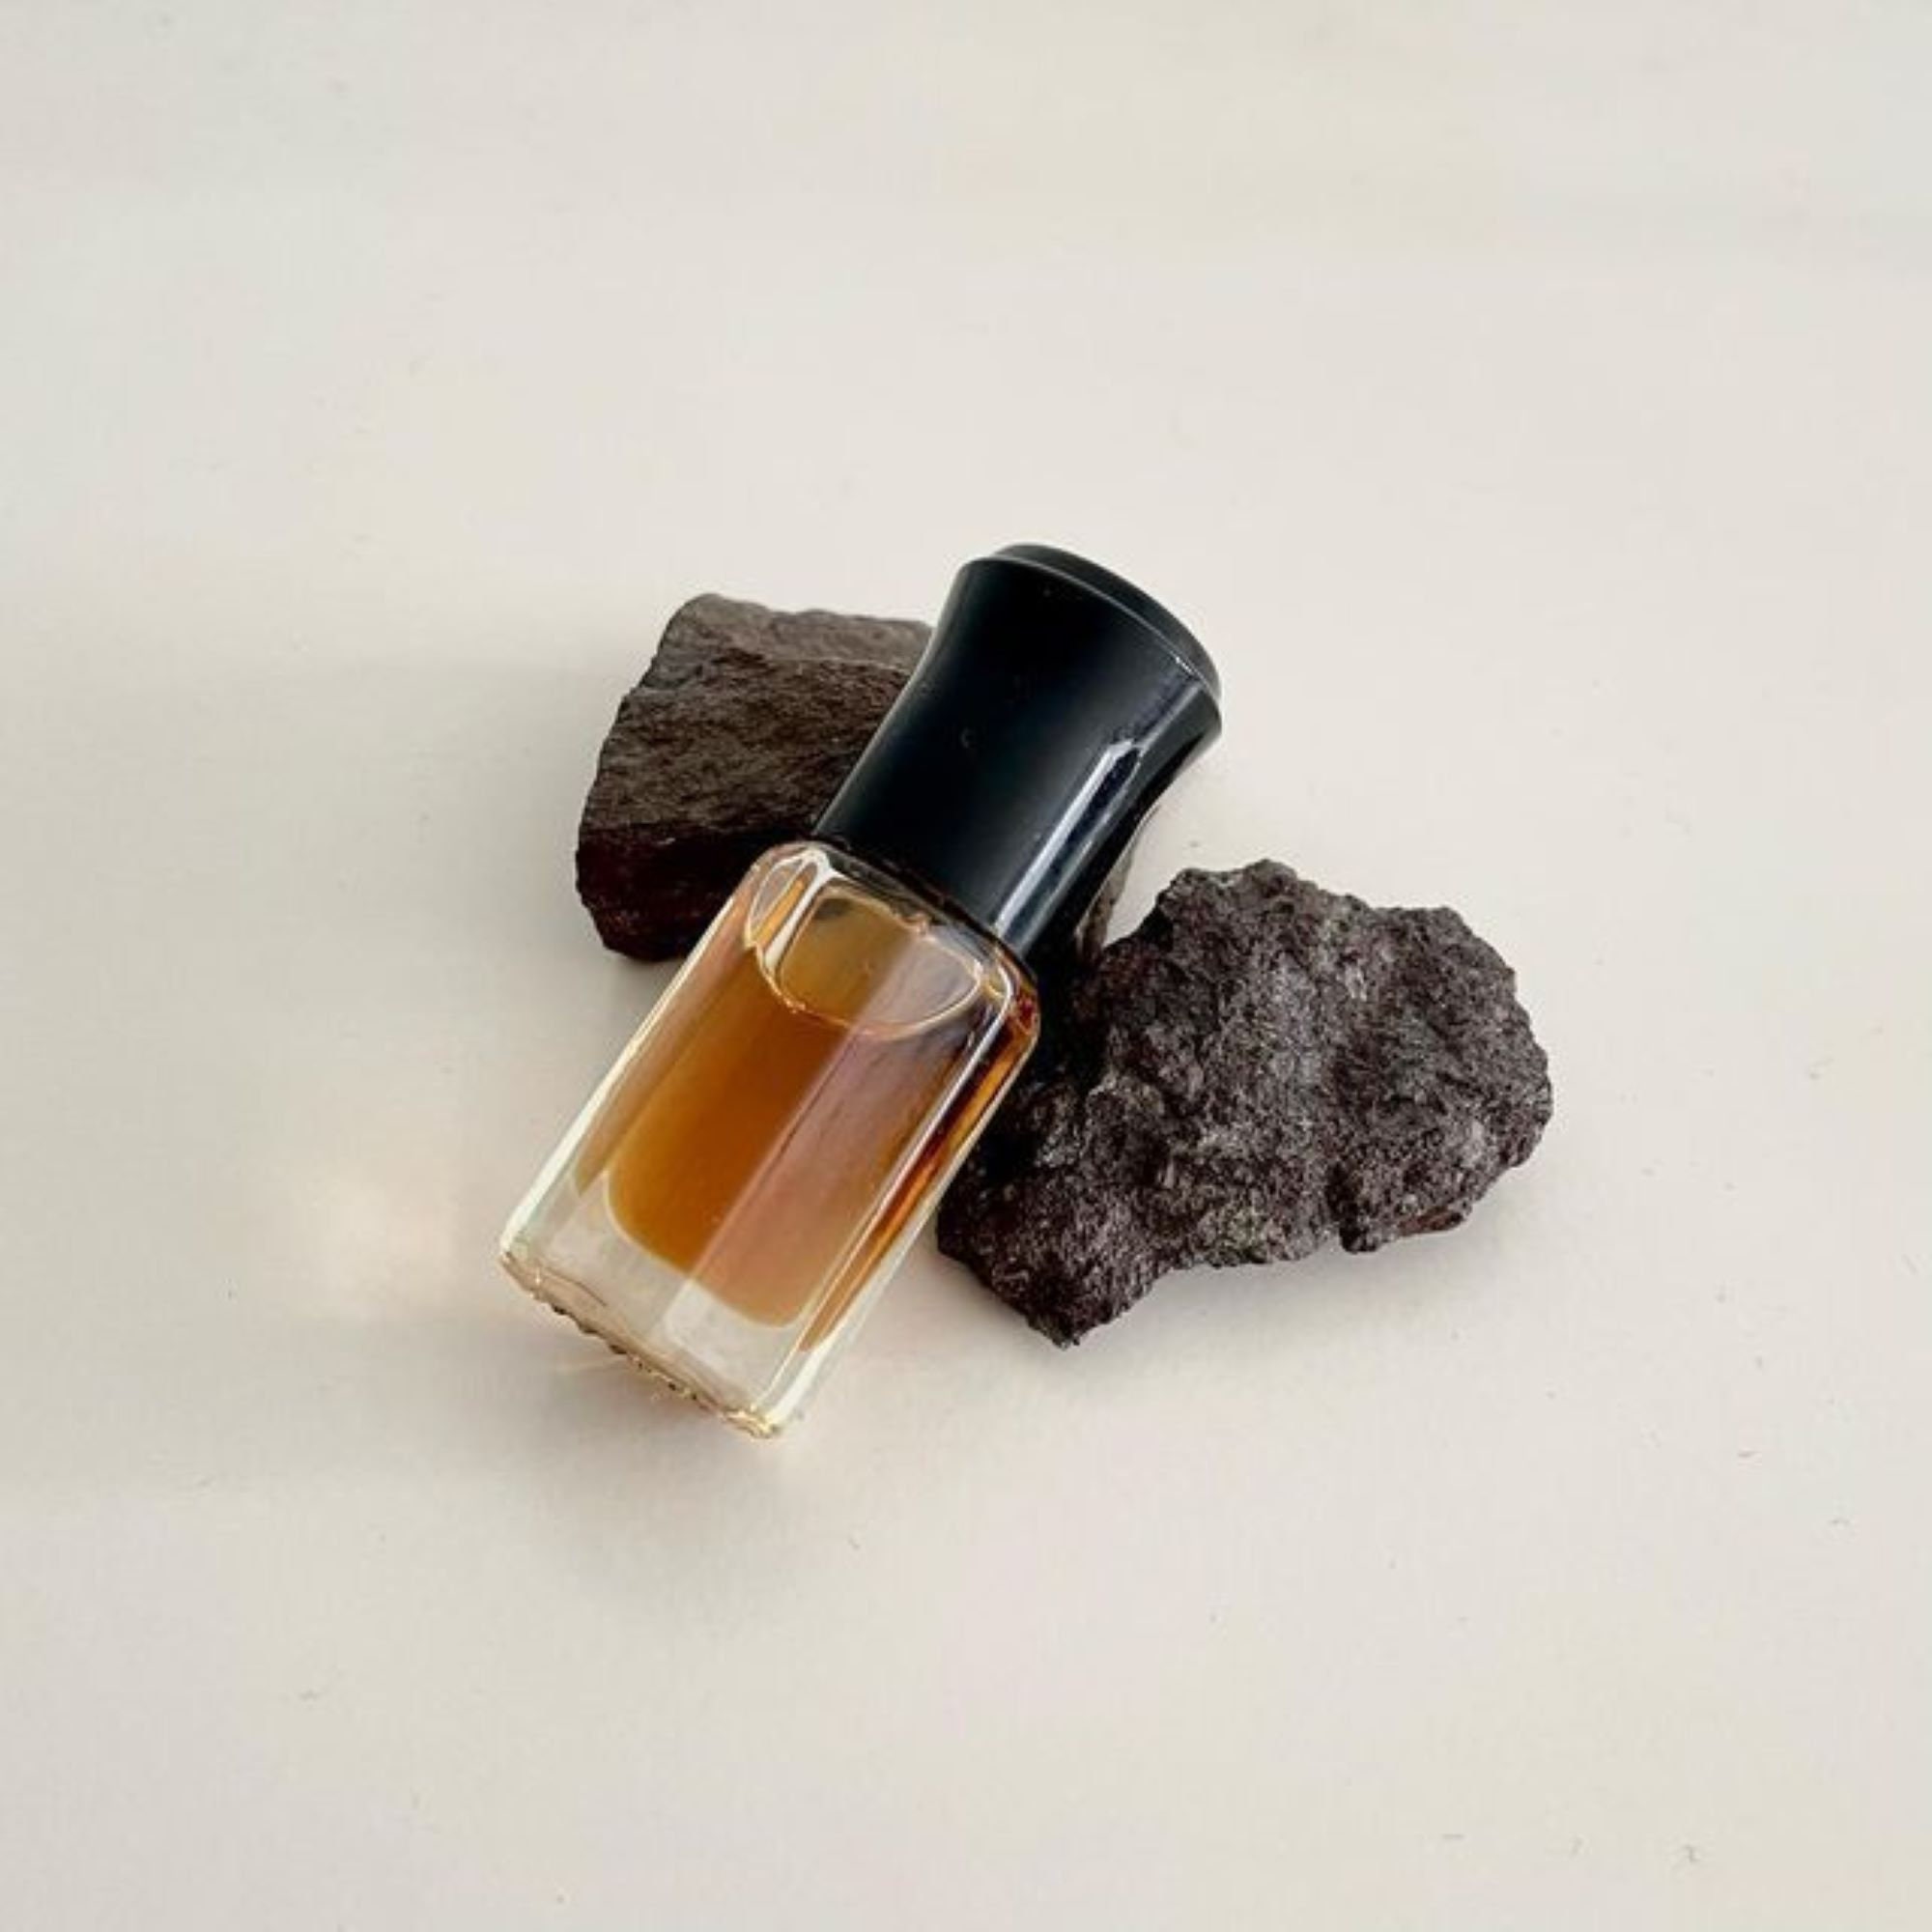 Scented Natural Body Oils - Oils & Blends, Amir Oud, Page 1, Amir Oud